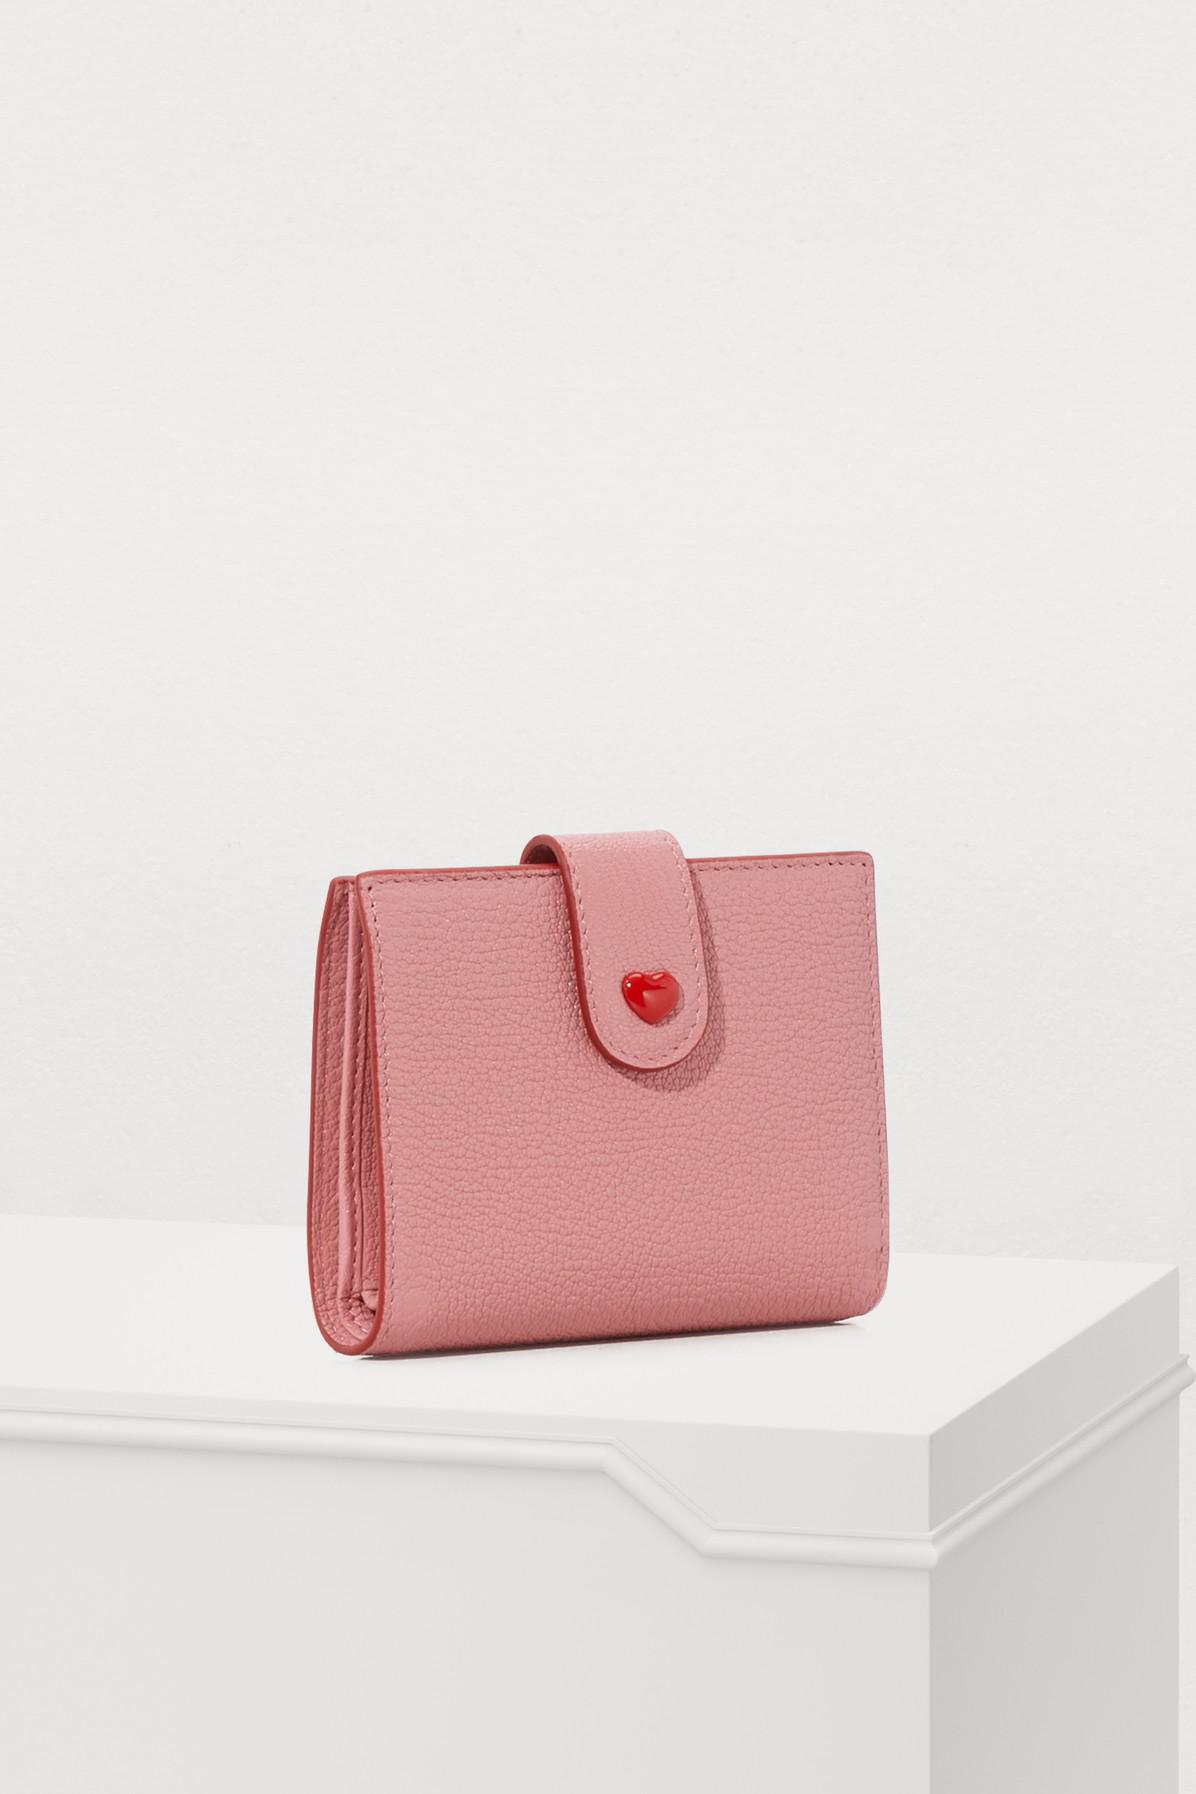 Miu Miu Forever Small Wallet in Pink | Lyst